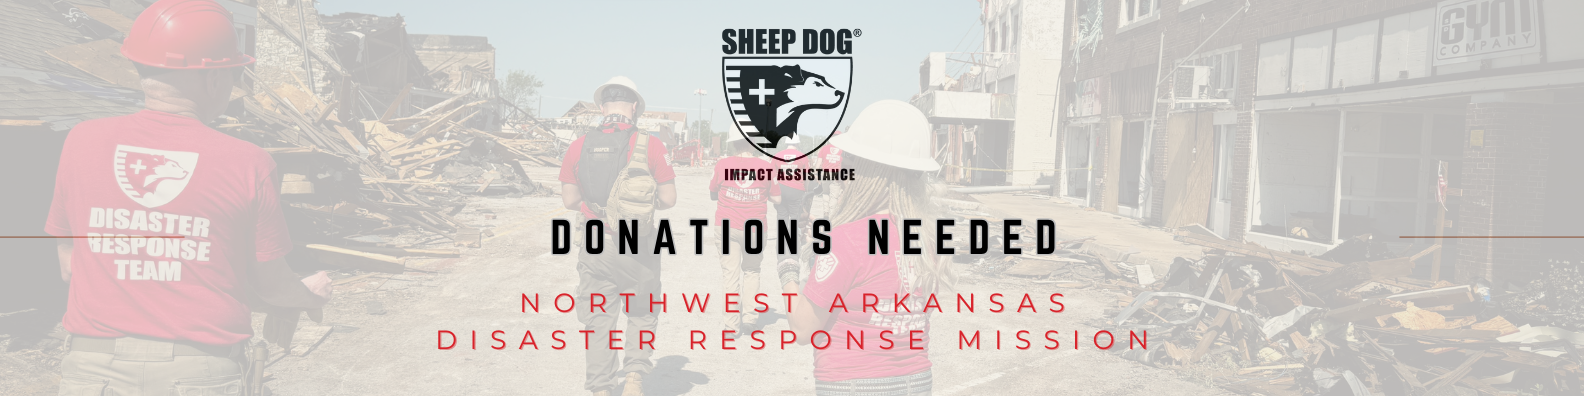 Sheep Dog Impact Assistance is coordinating from the Center for Nonprofits (1200 W. Walnut St., Rogers, AR 72756) parking lot. The back lot where the Sheep Dog vehicles are parked. There will be a daily meet-up and safety brief at 08:30 AM, every day through the weekend. To go out with a team be at the safety briefing. We will have volunteer t-shirts for you but supplies are limited, if you have previous DRM attire please wear that. Please wear jeans and heavy shoes, bring gloves and if you have any personal safety equipment.